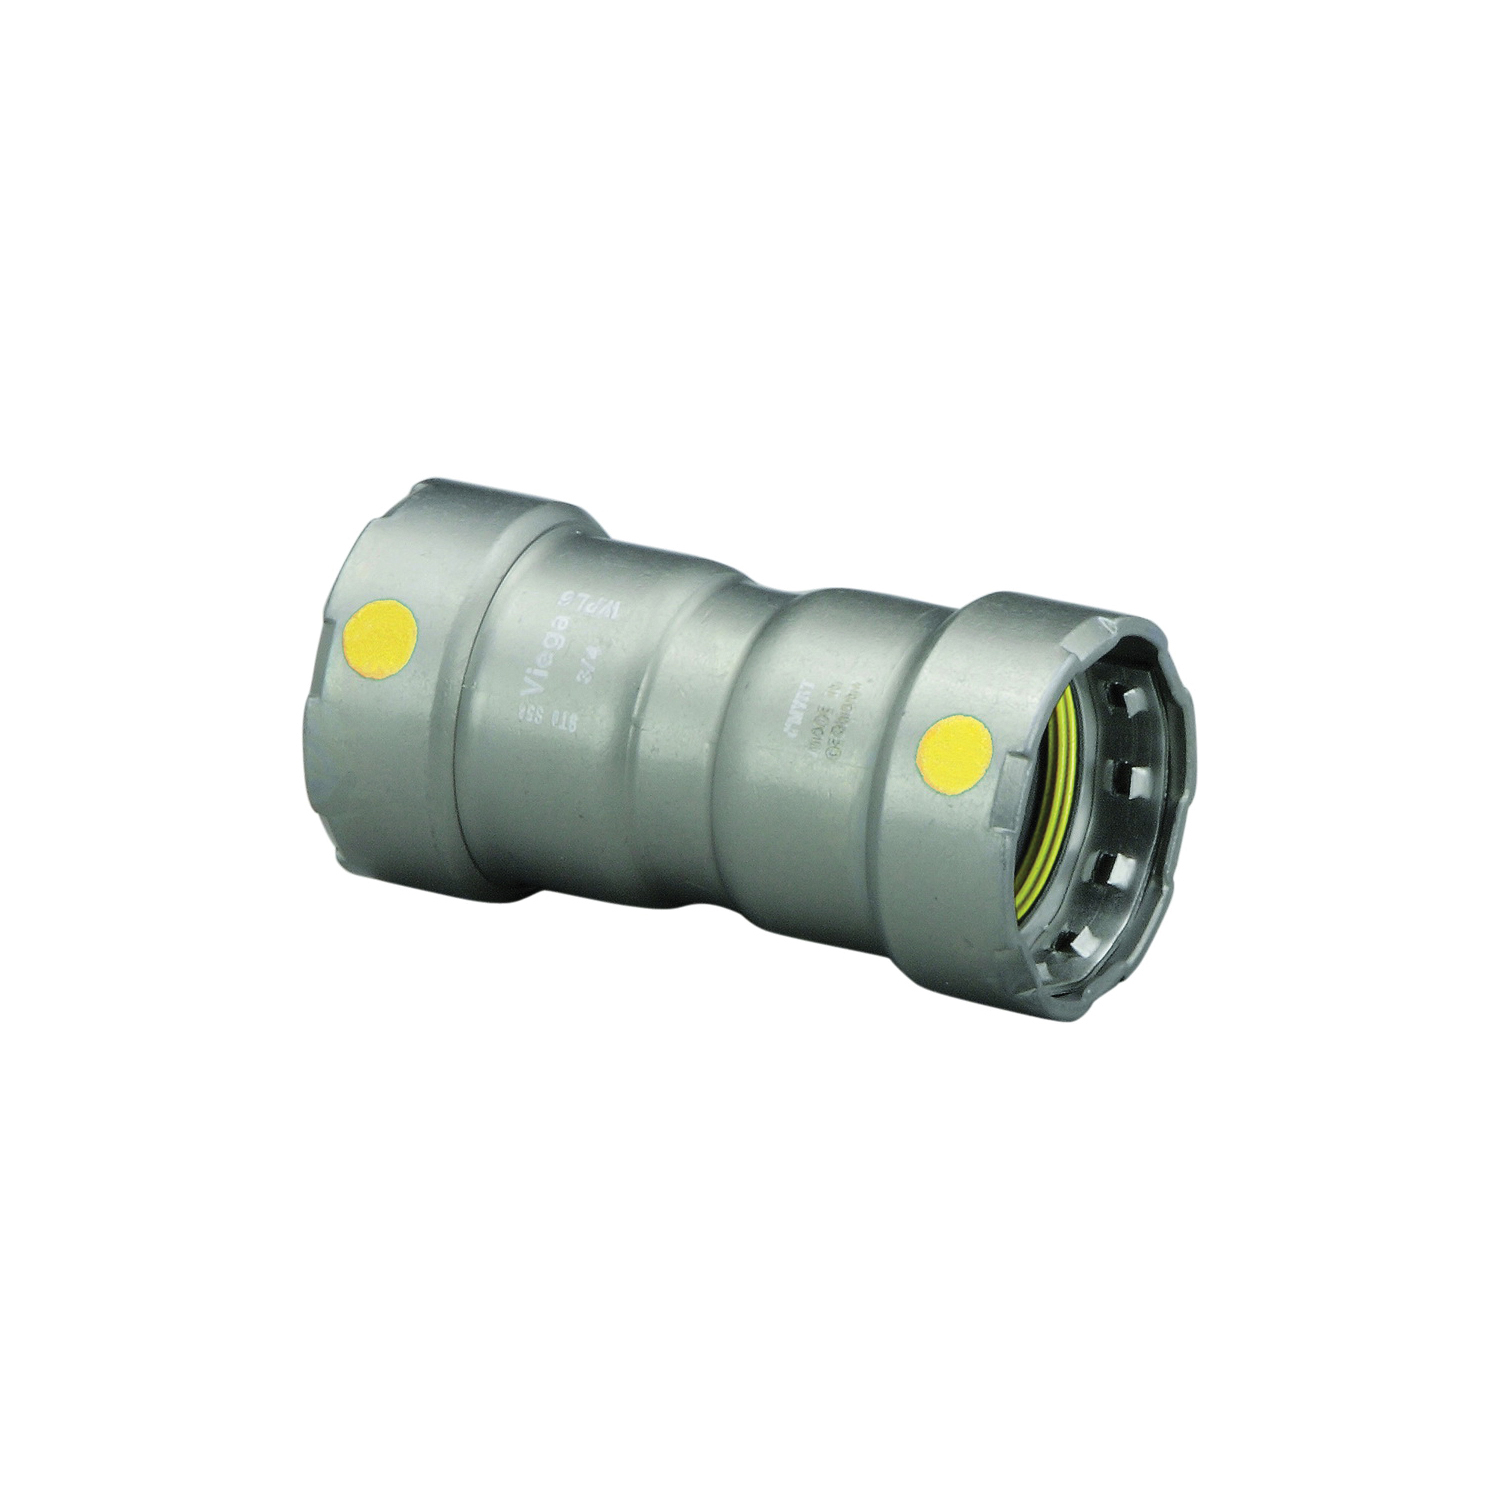 MegaPress®G 25001 Pipe Coupling With Stop, 1/2 in Nominal, Press End Style, Carbon Steel, Import